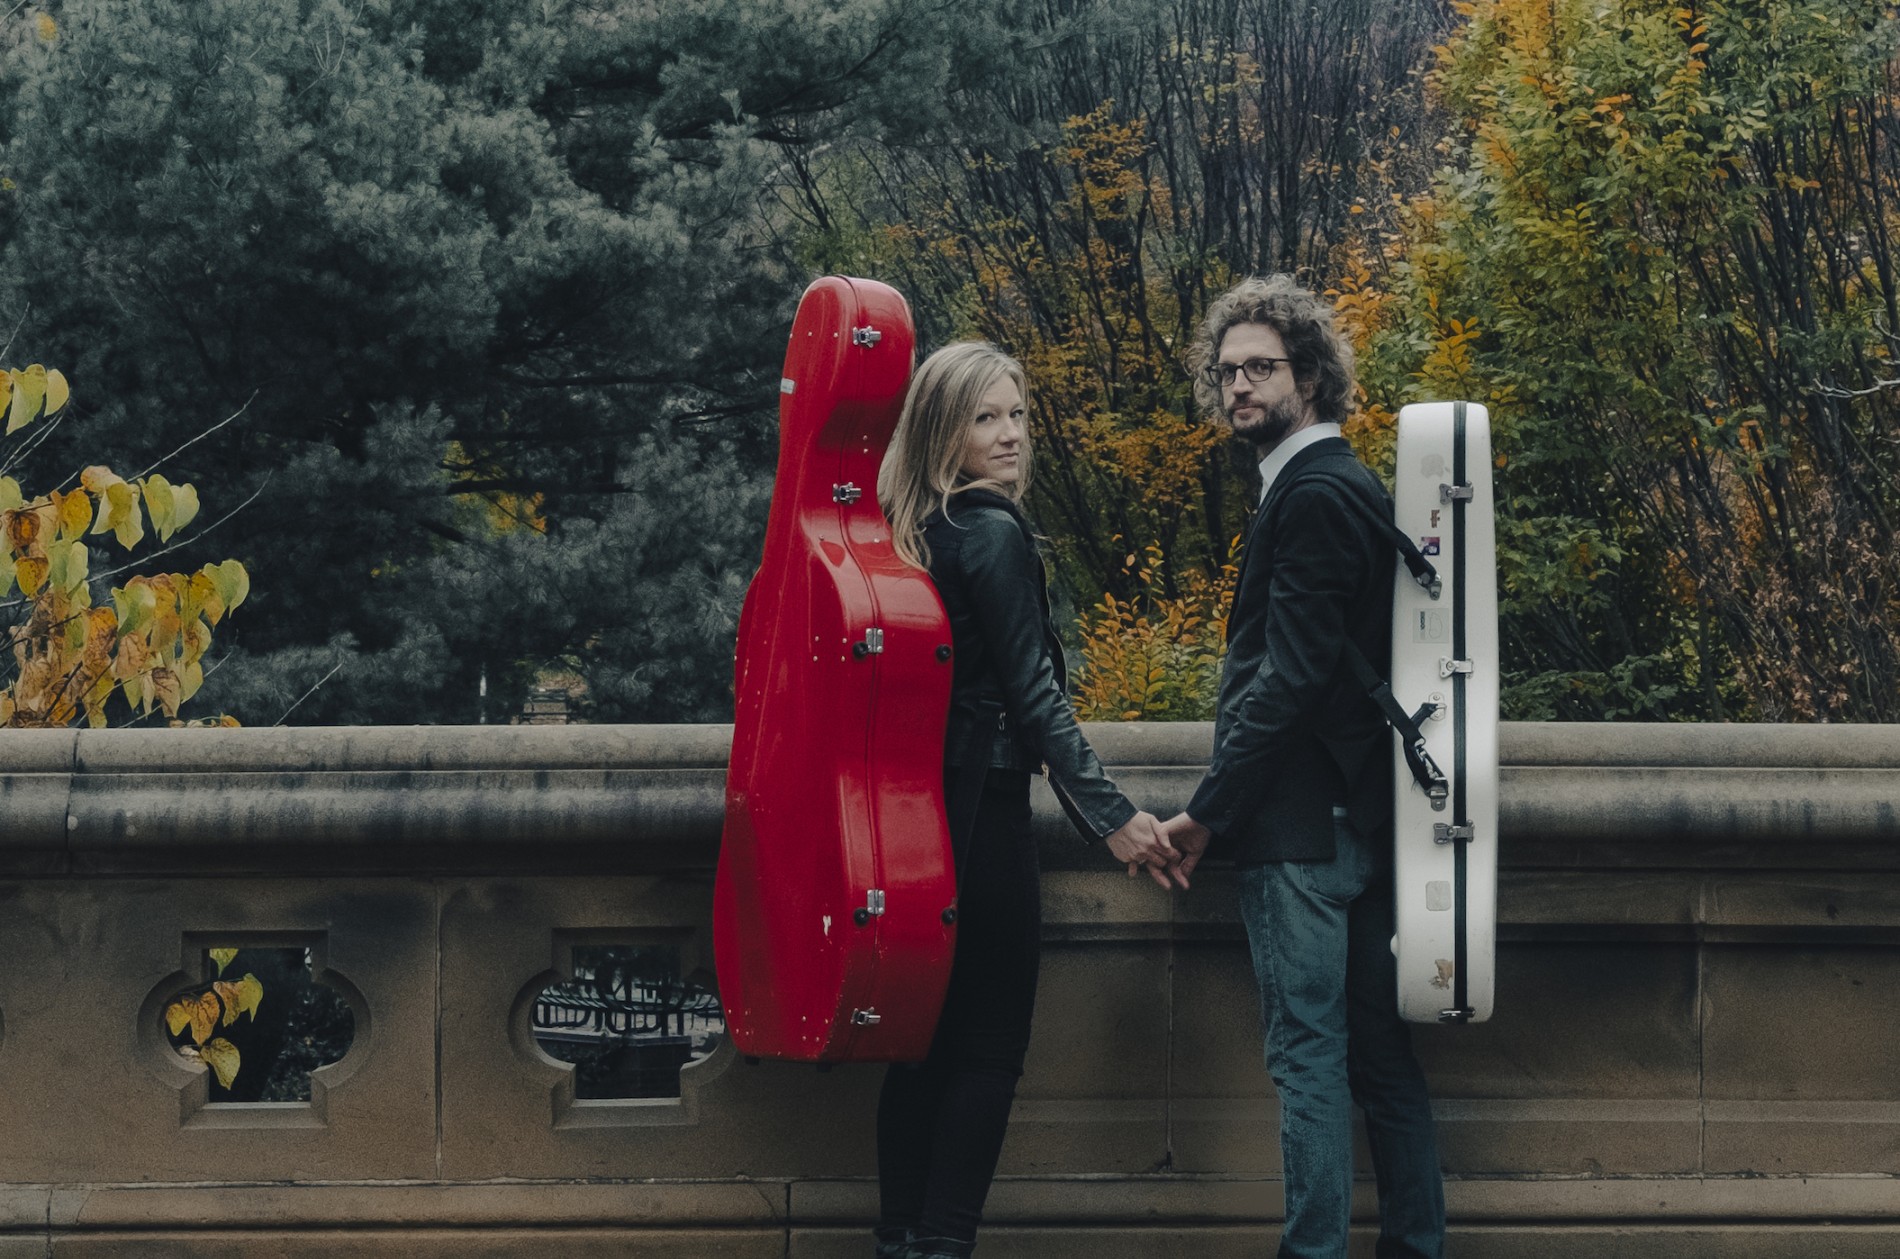 Boyd Meets Girl - a cellist wearing her instrument in a red back-pack carrier and a guitarist wearing his instrument as a back-pack case, holding hands on a bridge in autumn.